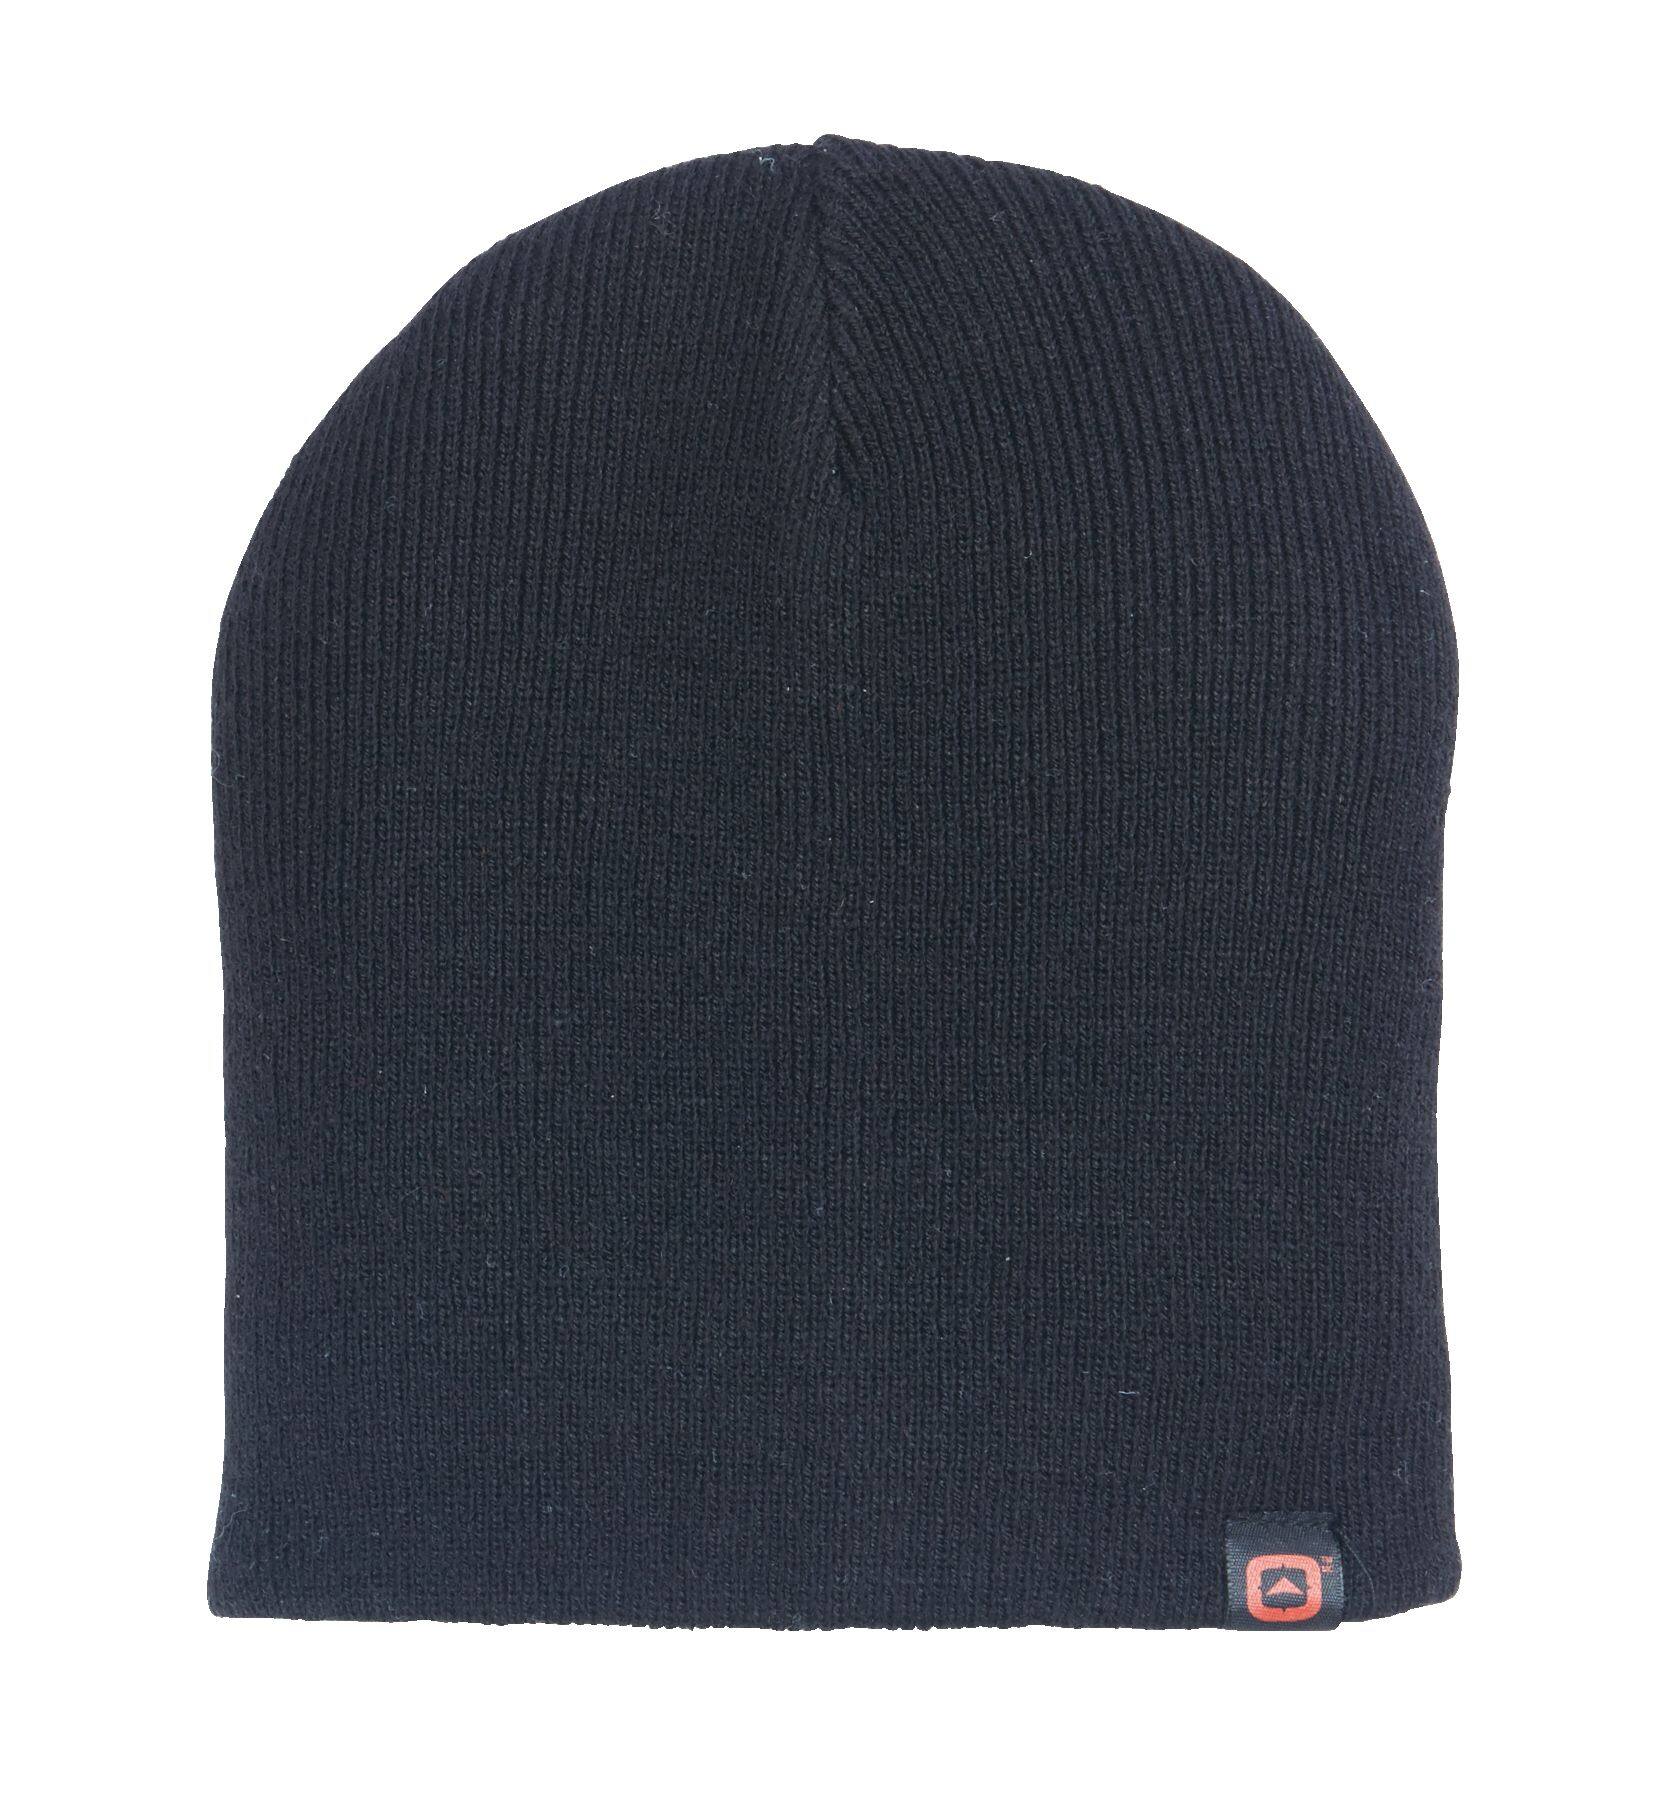 Outbound Thinsulate Double Layer Knit Toque Beanie Hat For Winter